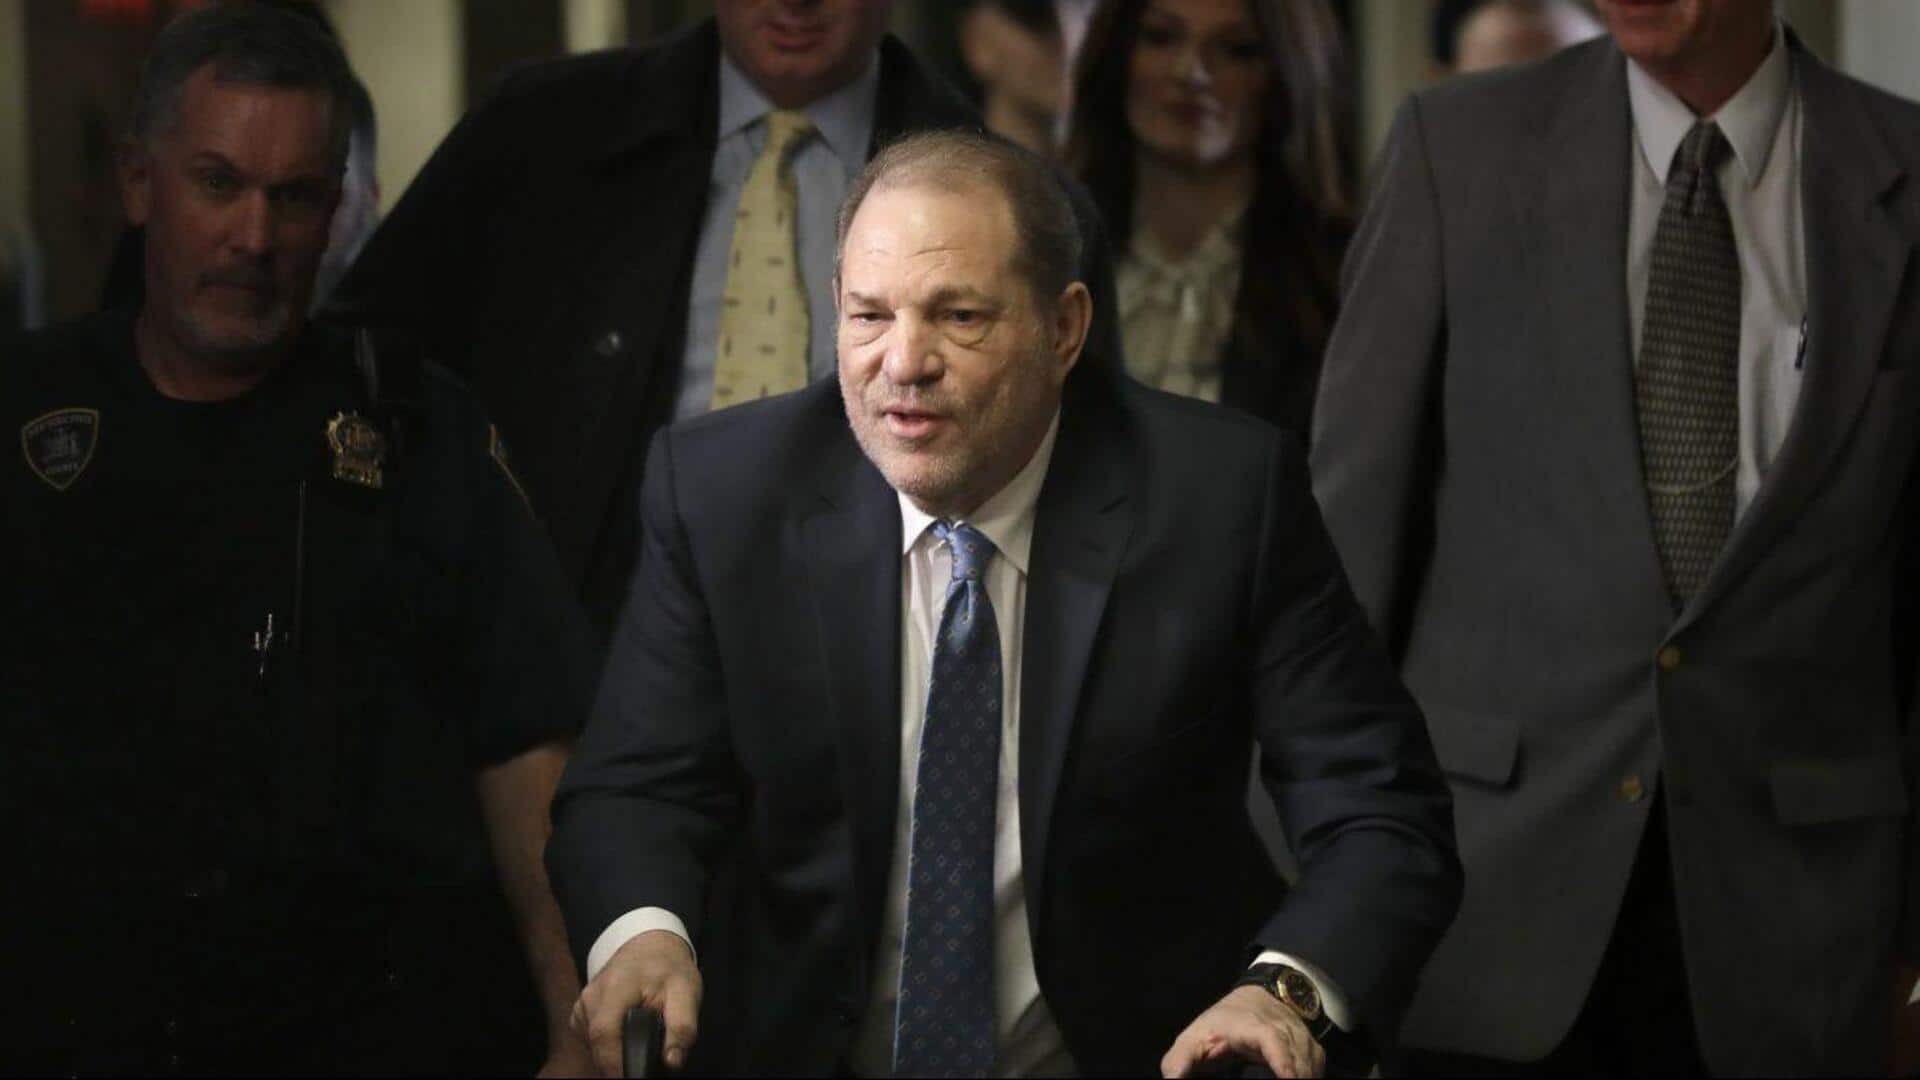 'Train wreck, health-wise': Harvey Weinstein hospitalized before NY court appearance